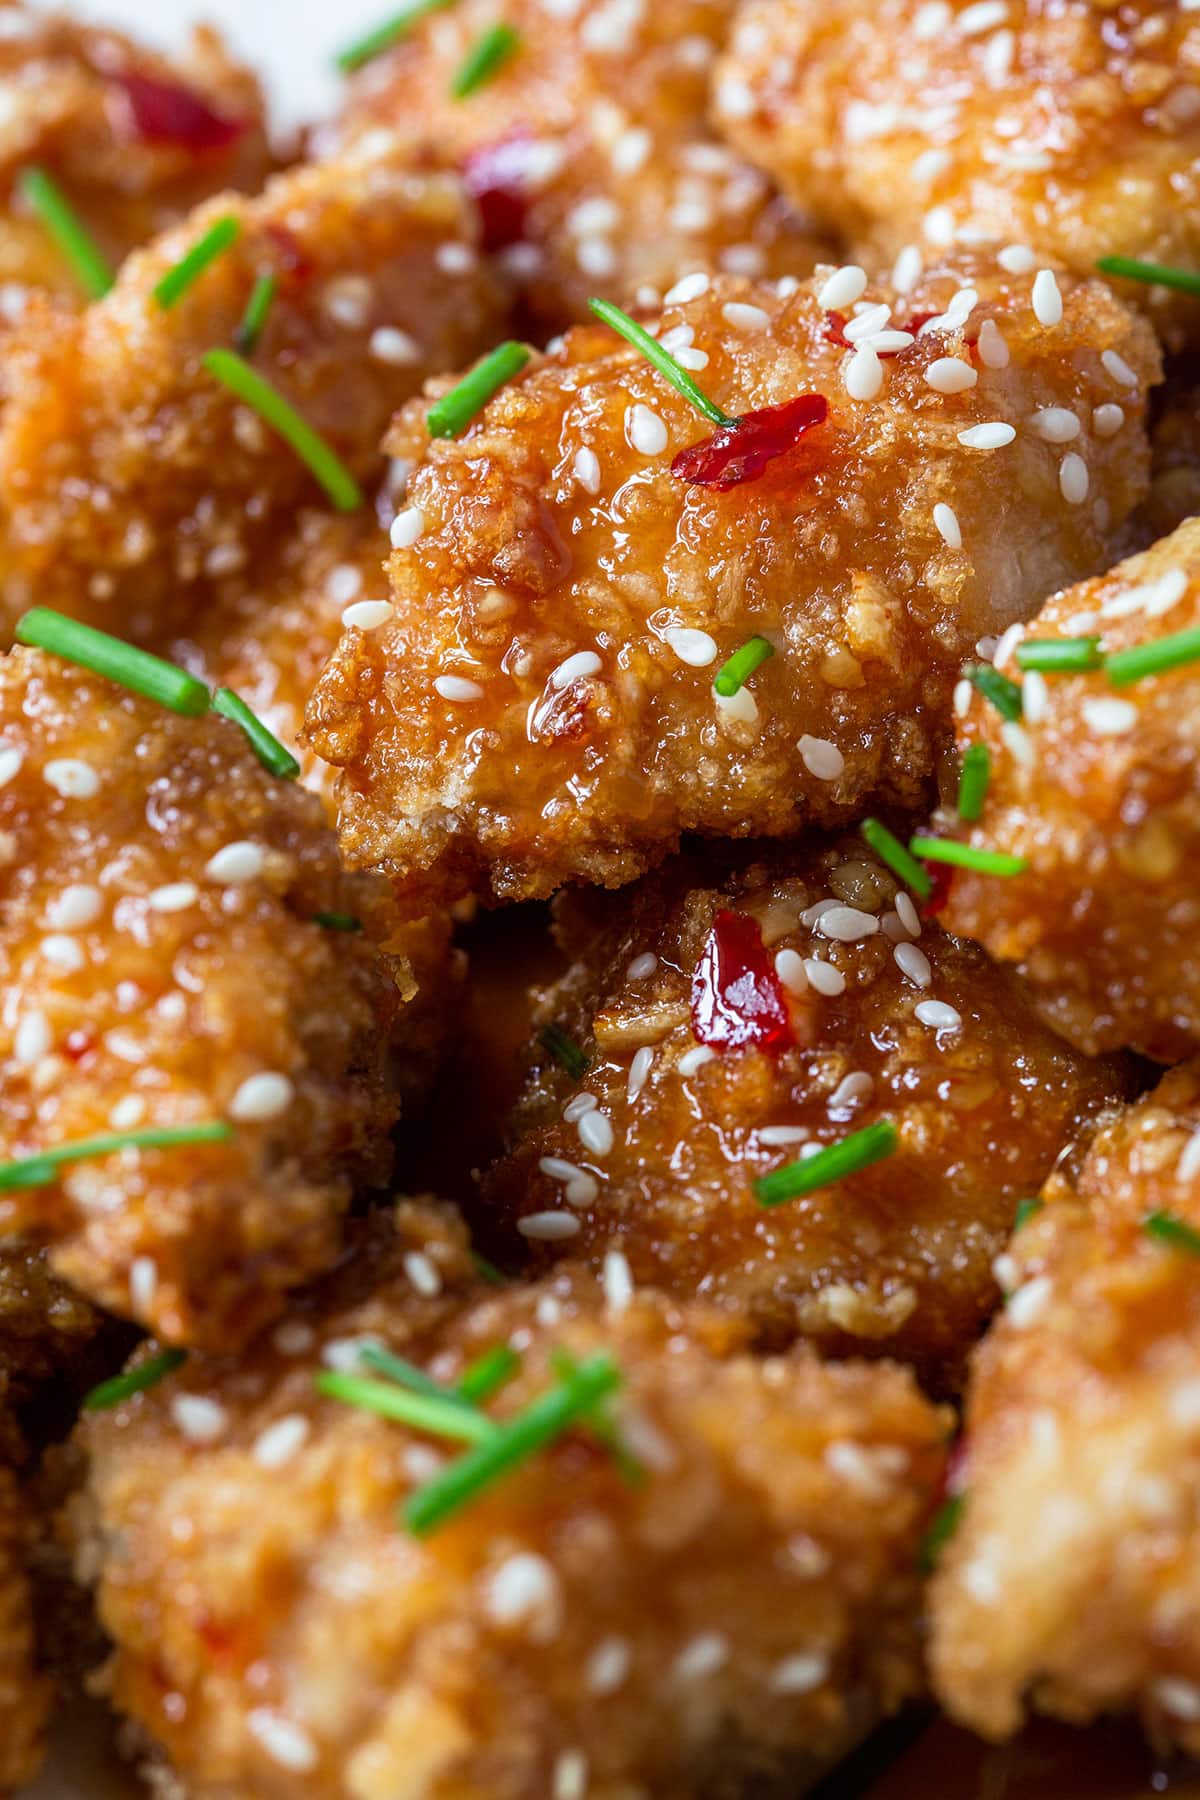 Crispy breadcrumbs coated honey garlic chicken nuggets, topped with honey garlic sauce.